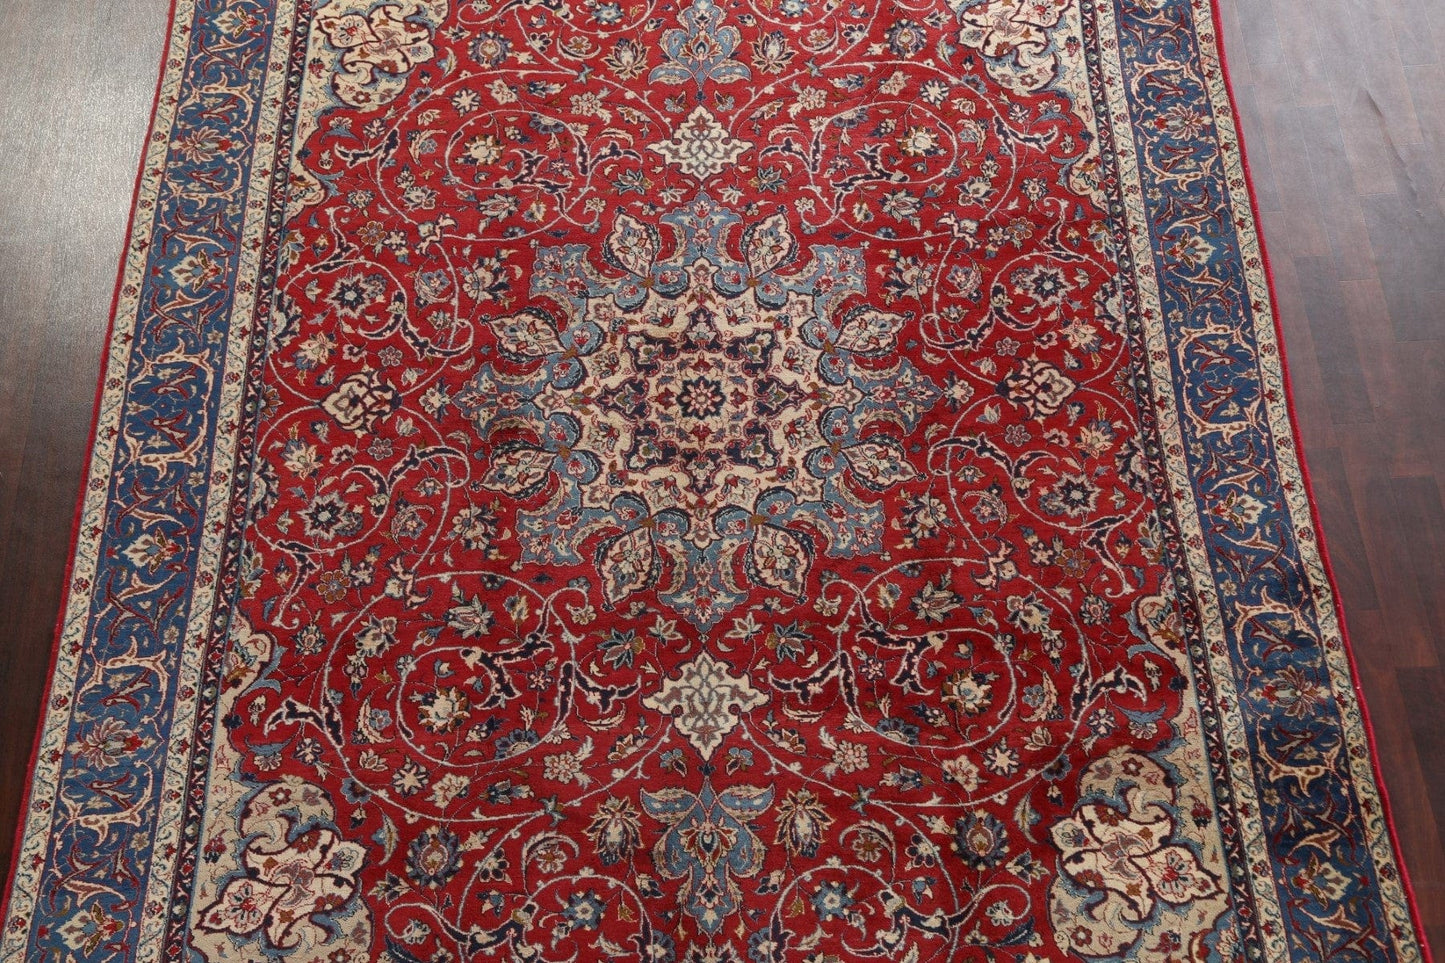 Vintage Red Najafabad Persian Area Rug 8x13